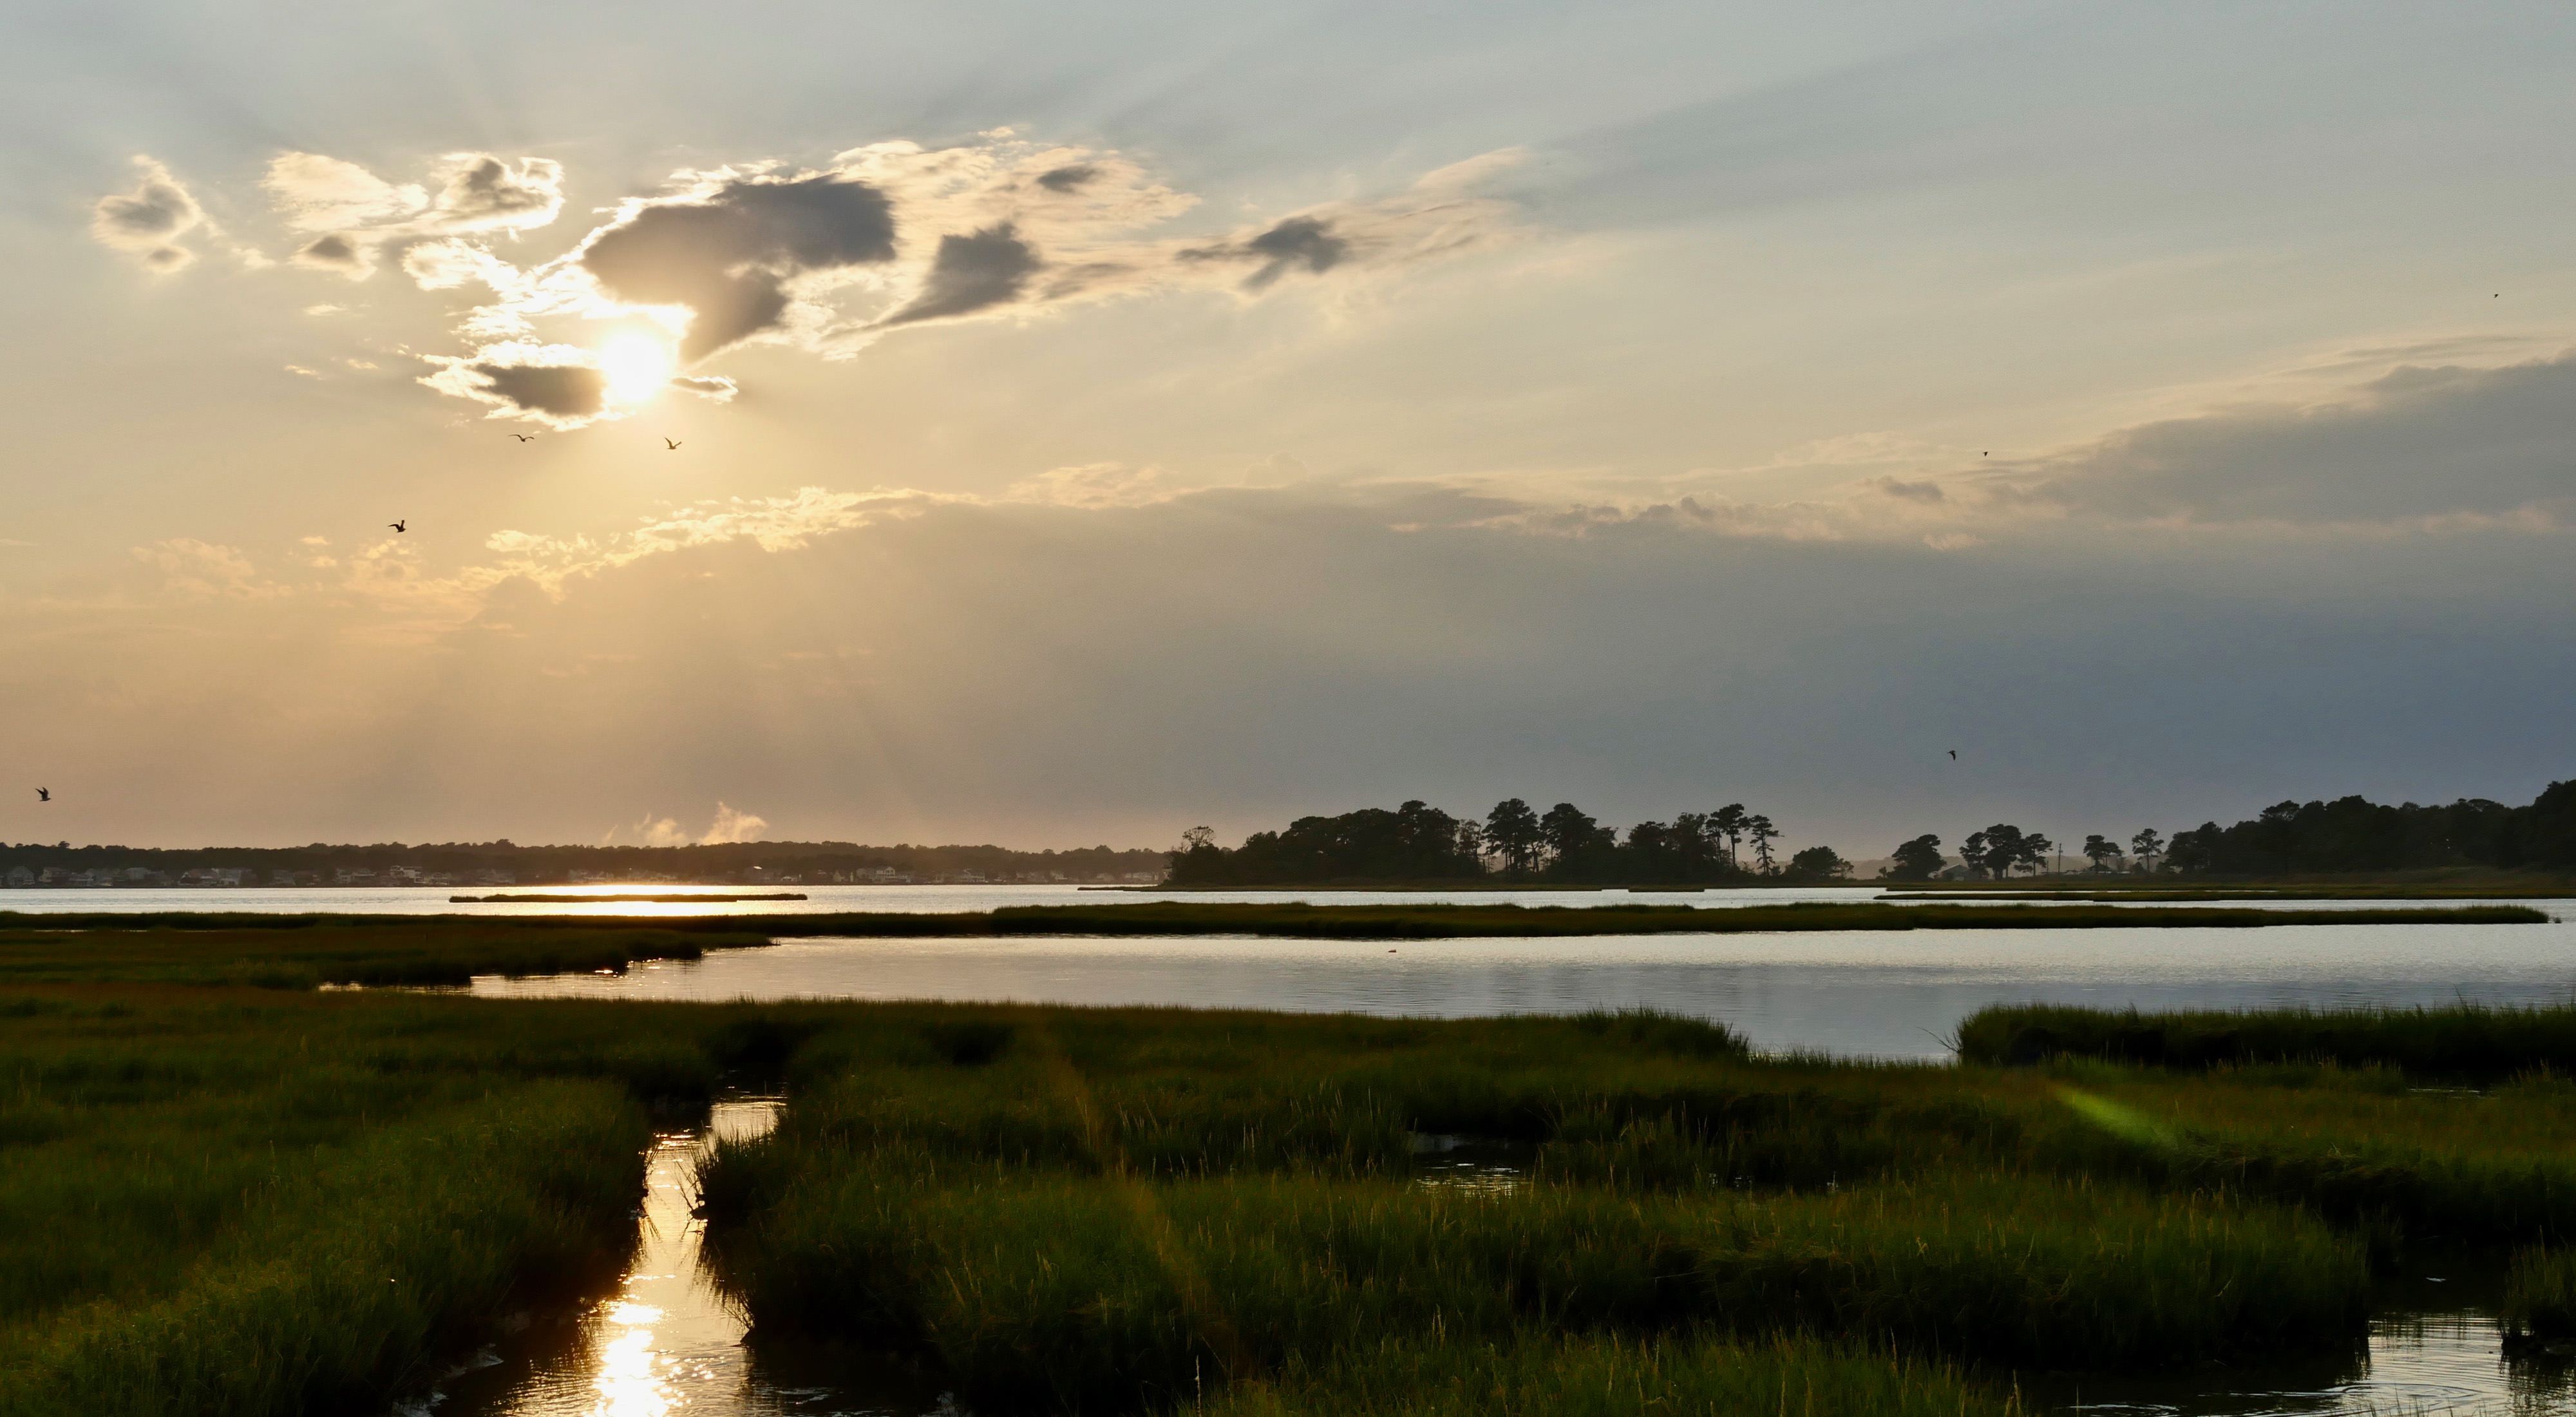 The sun begins to set over wetlands in Maryland just after a passing September thunderstorm.